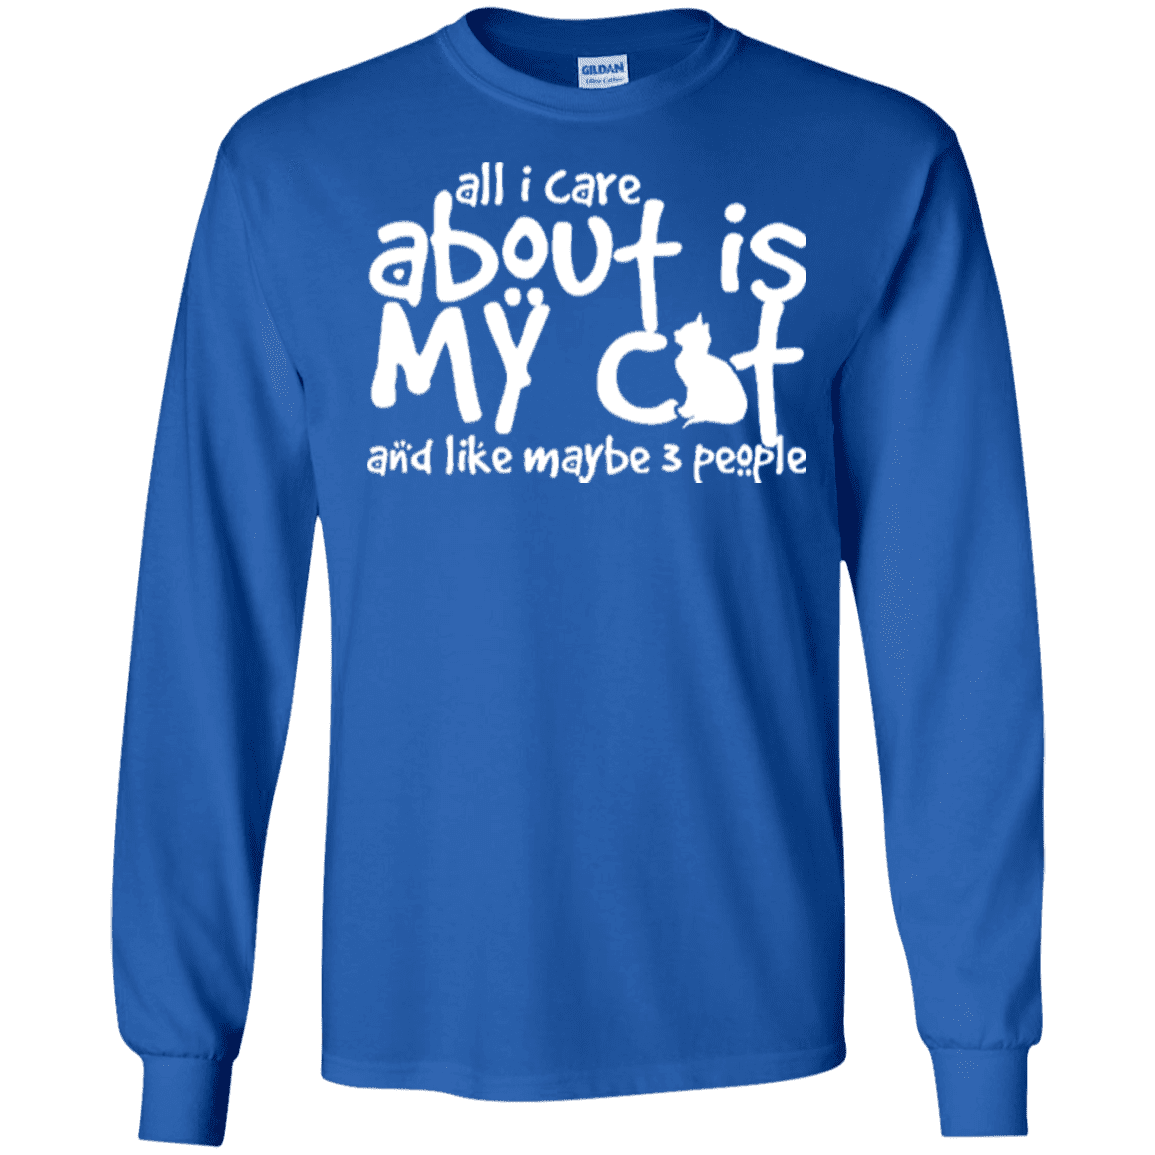 All I Care About Is My Cat - Long Sleeve T Shirt.